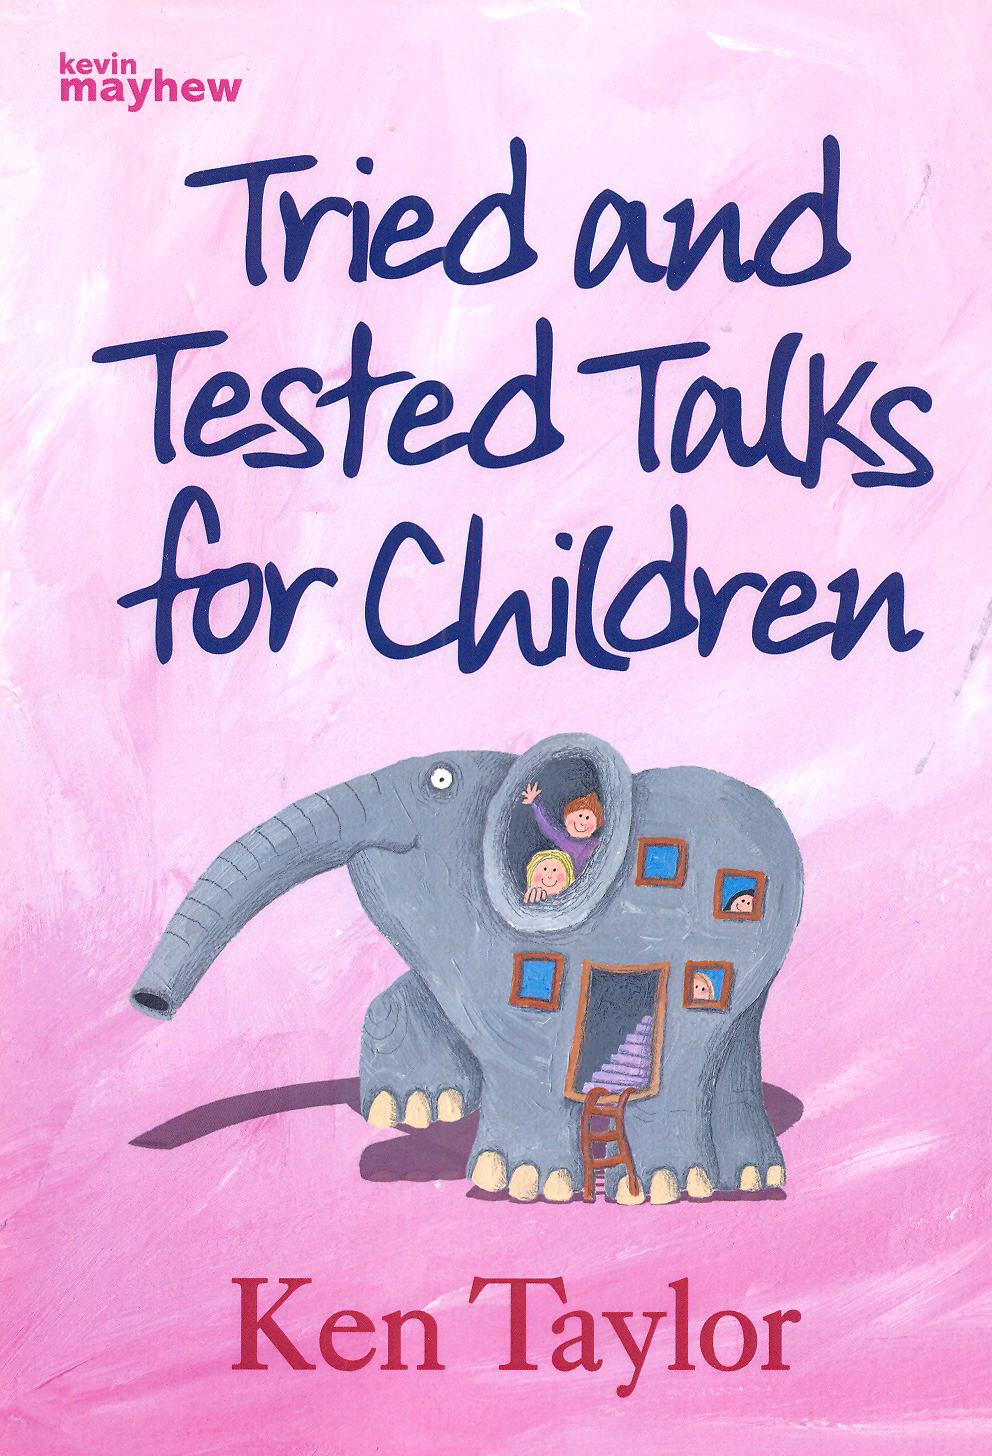 Tried and Tested Talks for Children